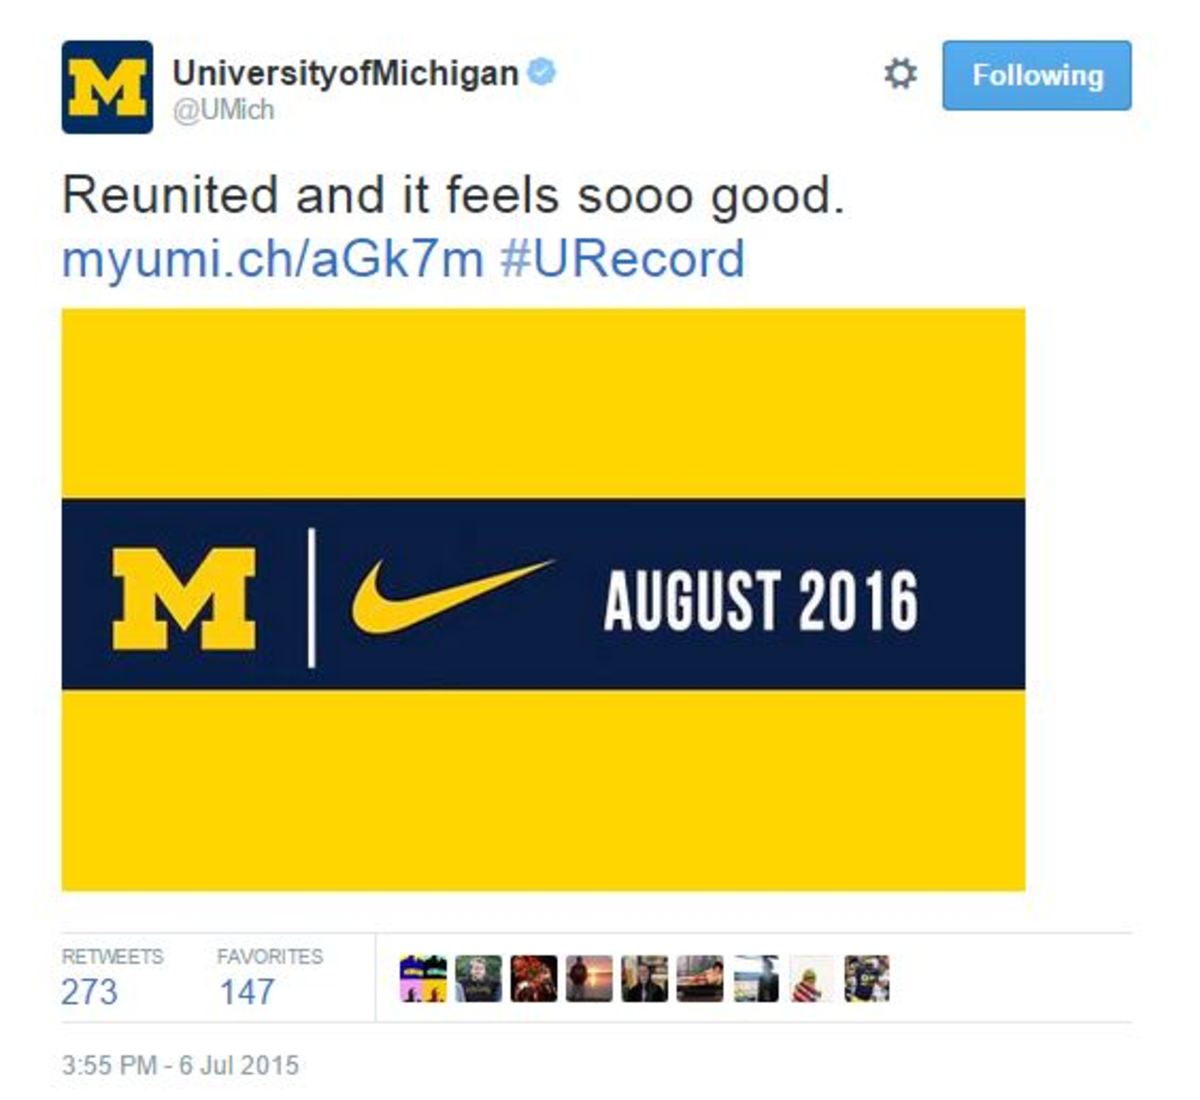 Michigan tweets it has reunited its relationship with Nike starting in August 2016.